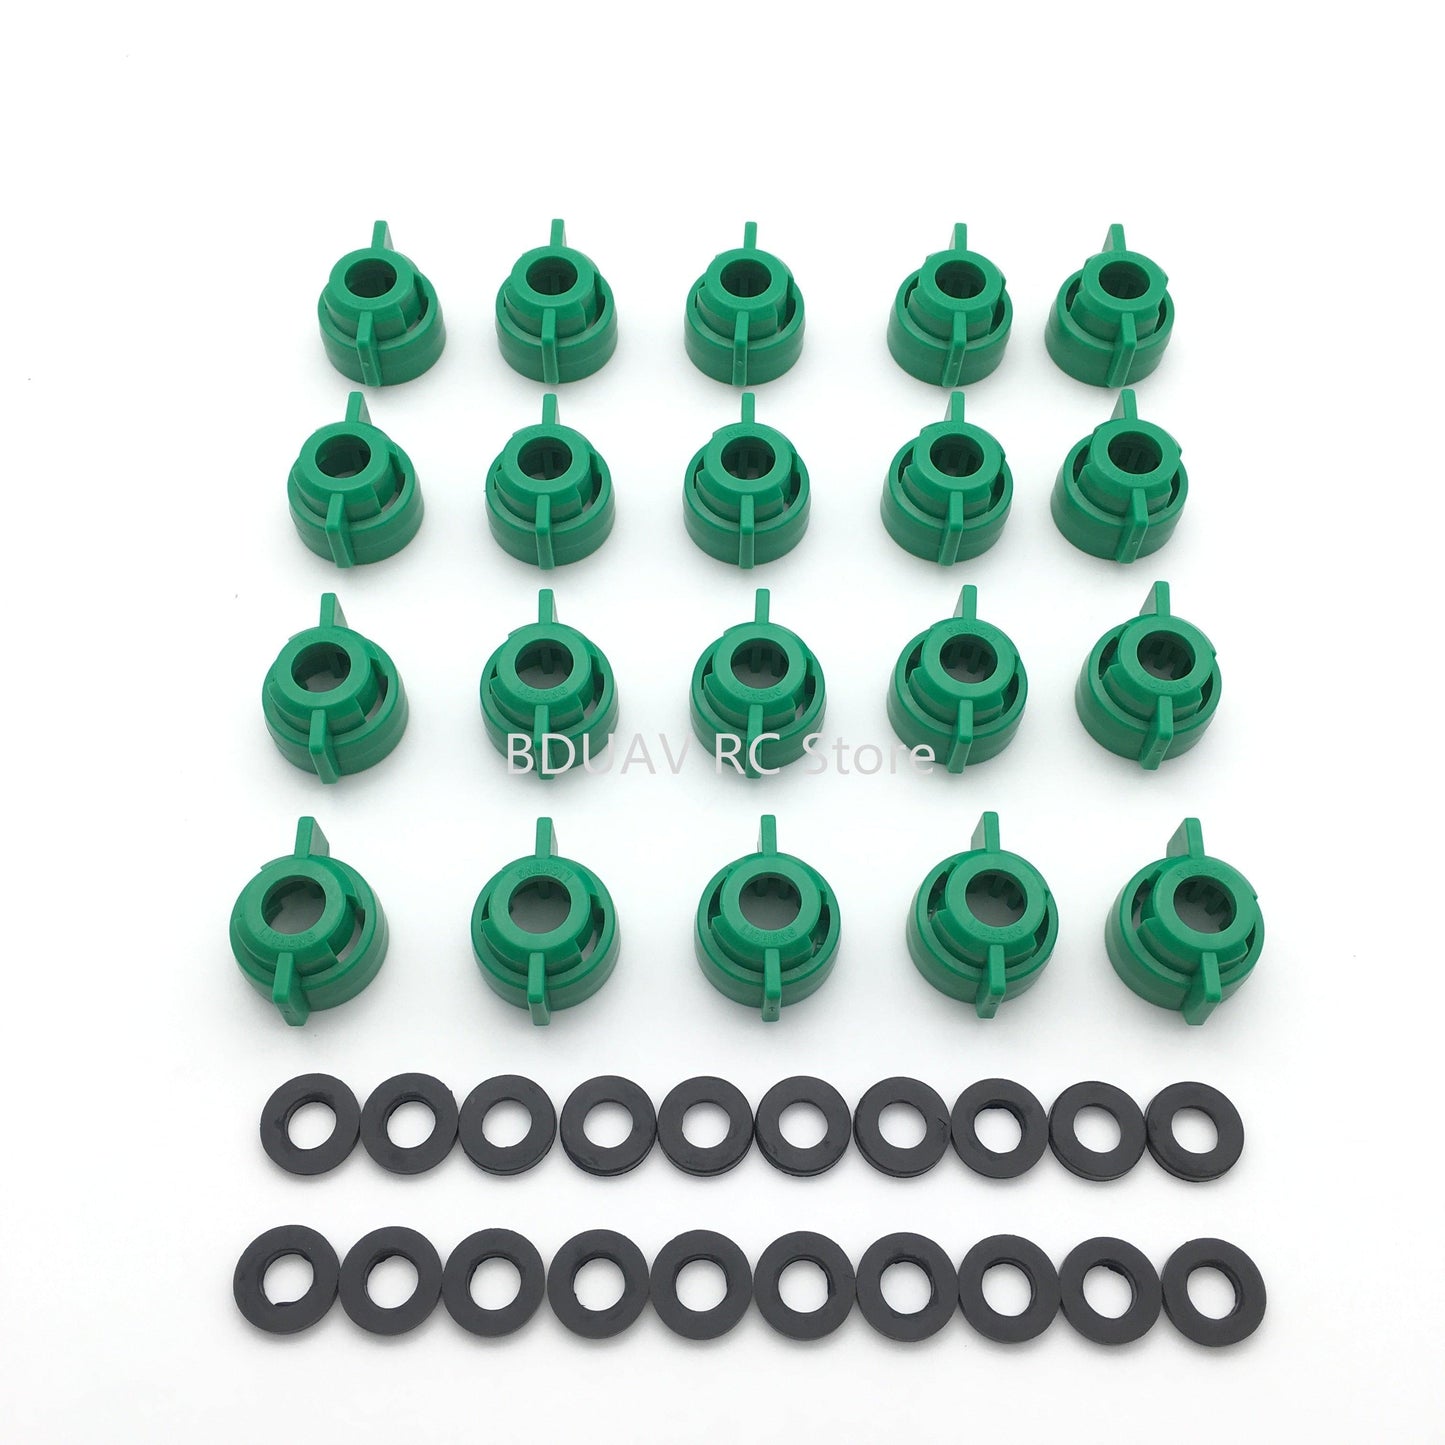 20pcs EFT Plant UAV plant Drone Pipe Nozzle fittings sprayer nozzle sprayer round mouth / flat mouth plug / card cap Agriculture Drone Accessories - RCDrone